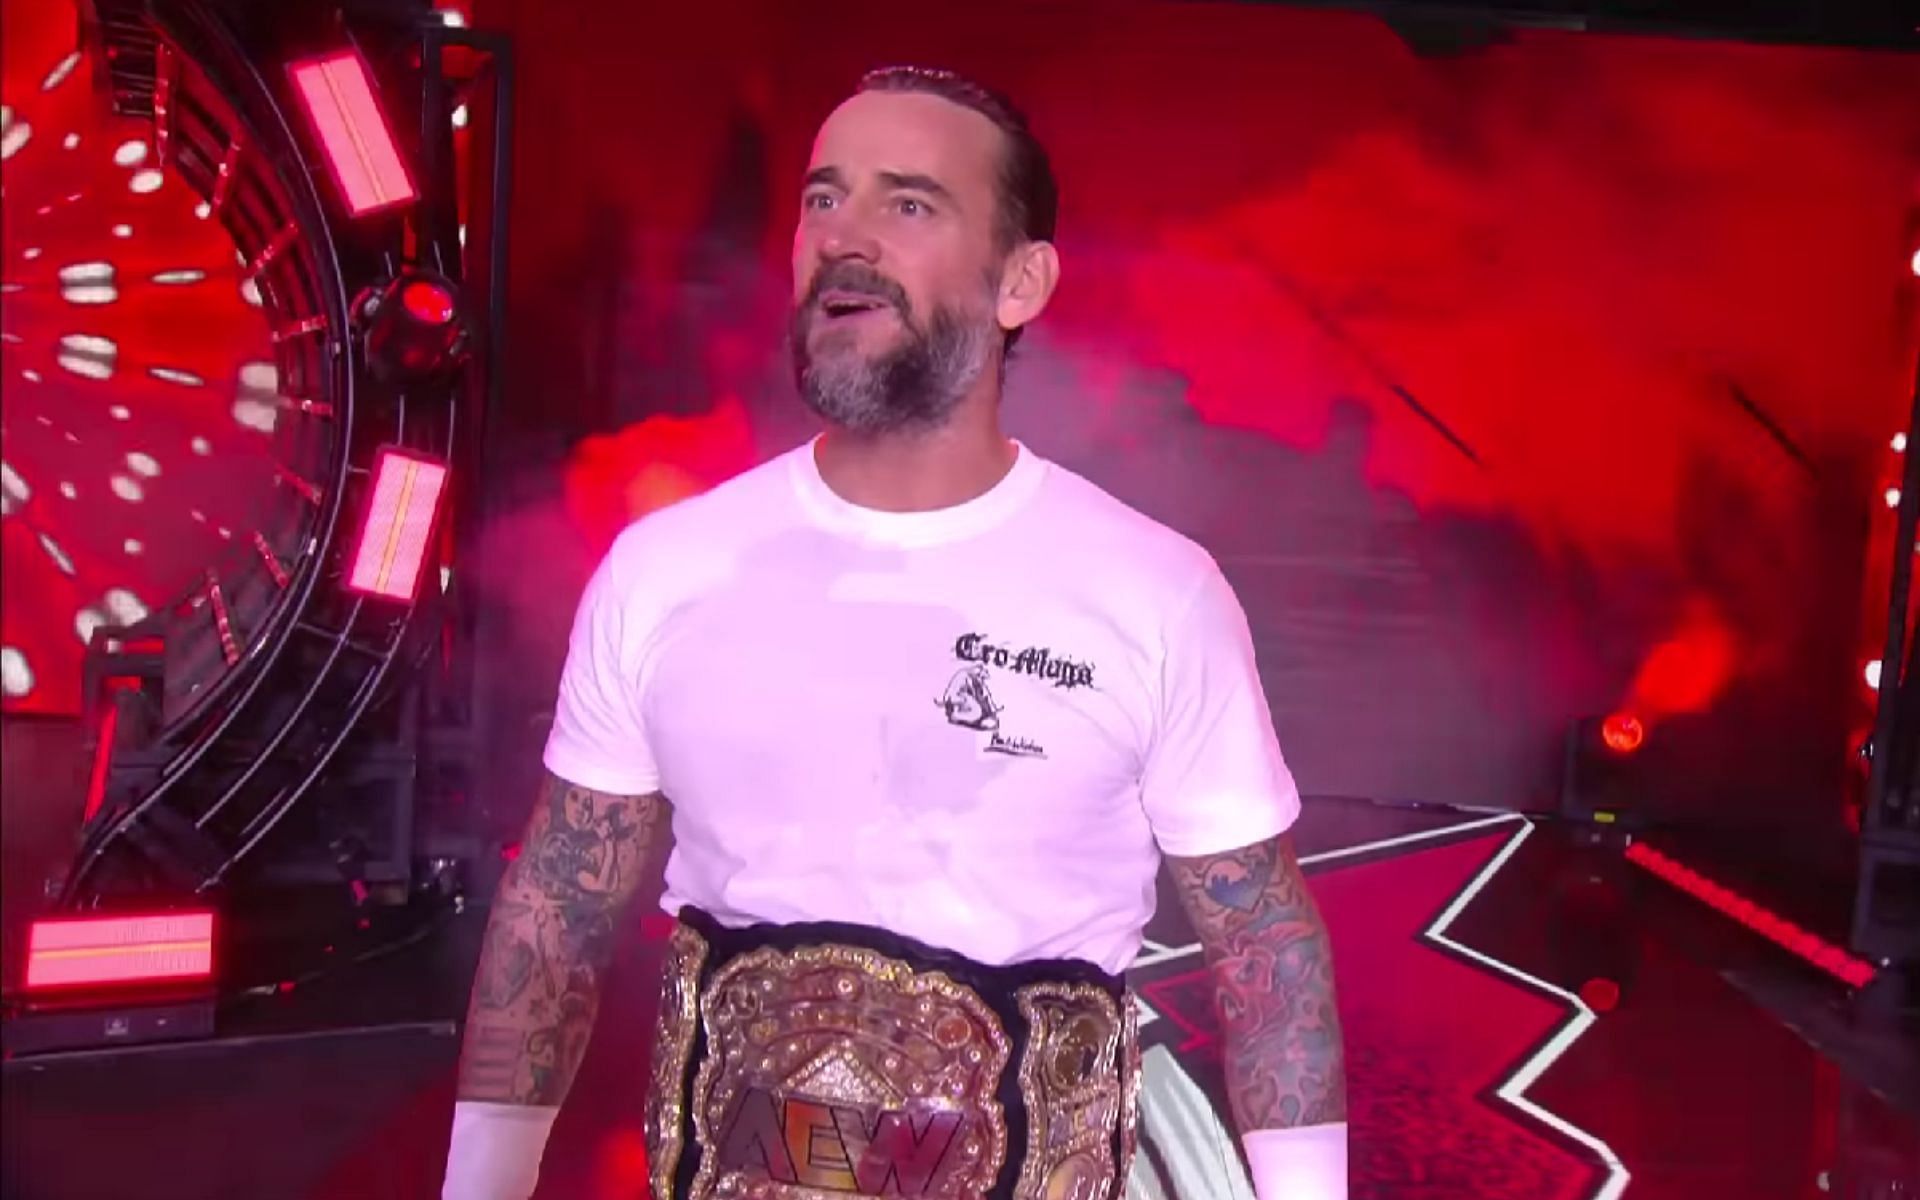 AEW World Heavyweight Champion CM Punk is currently sidelined due to an injury.